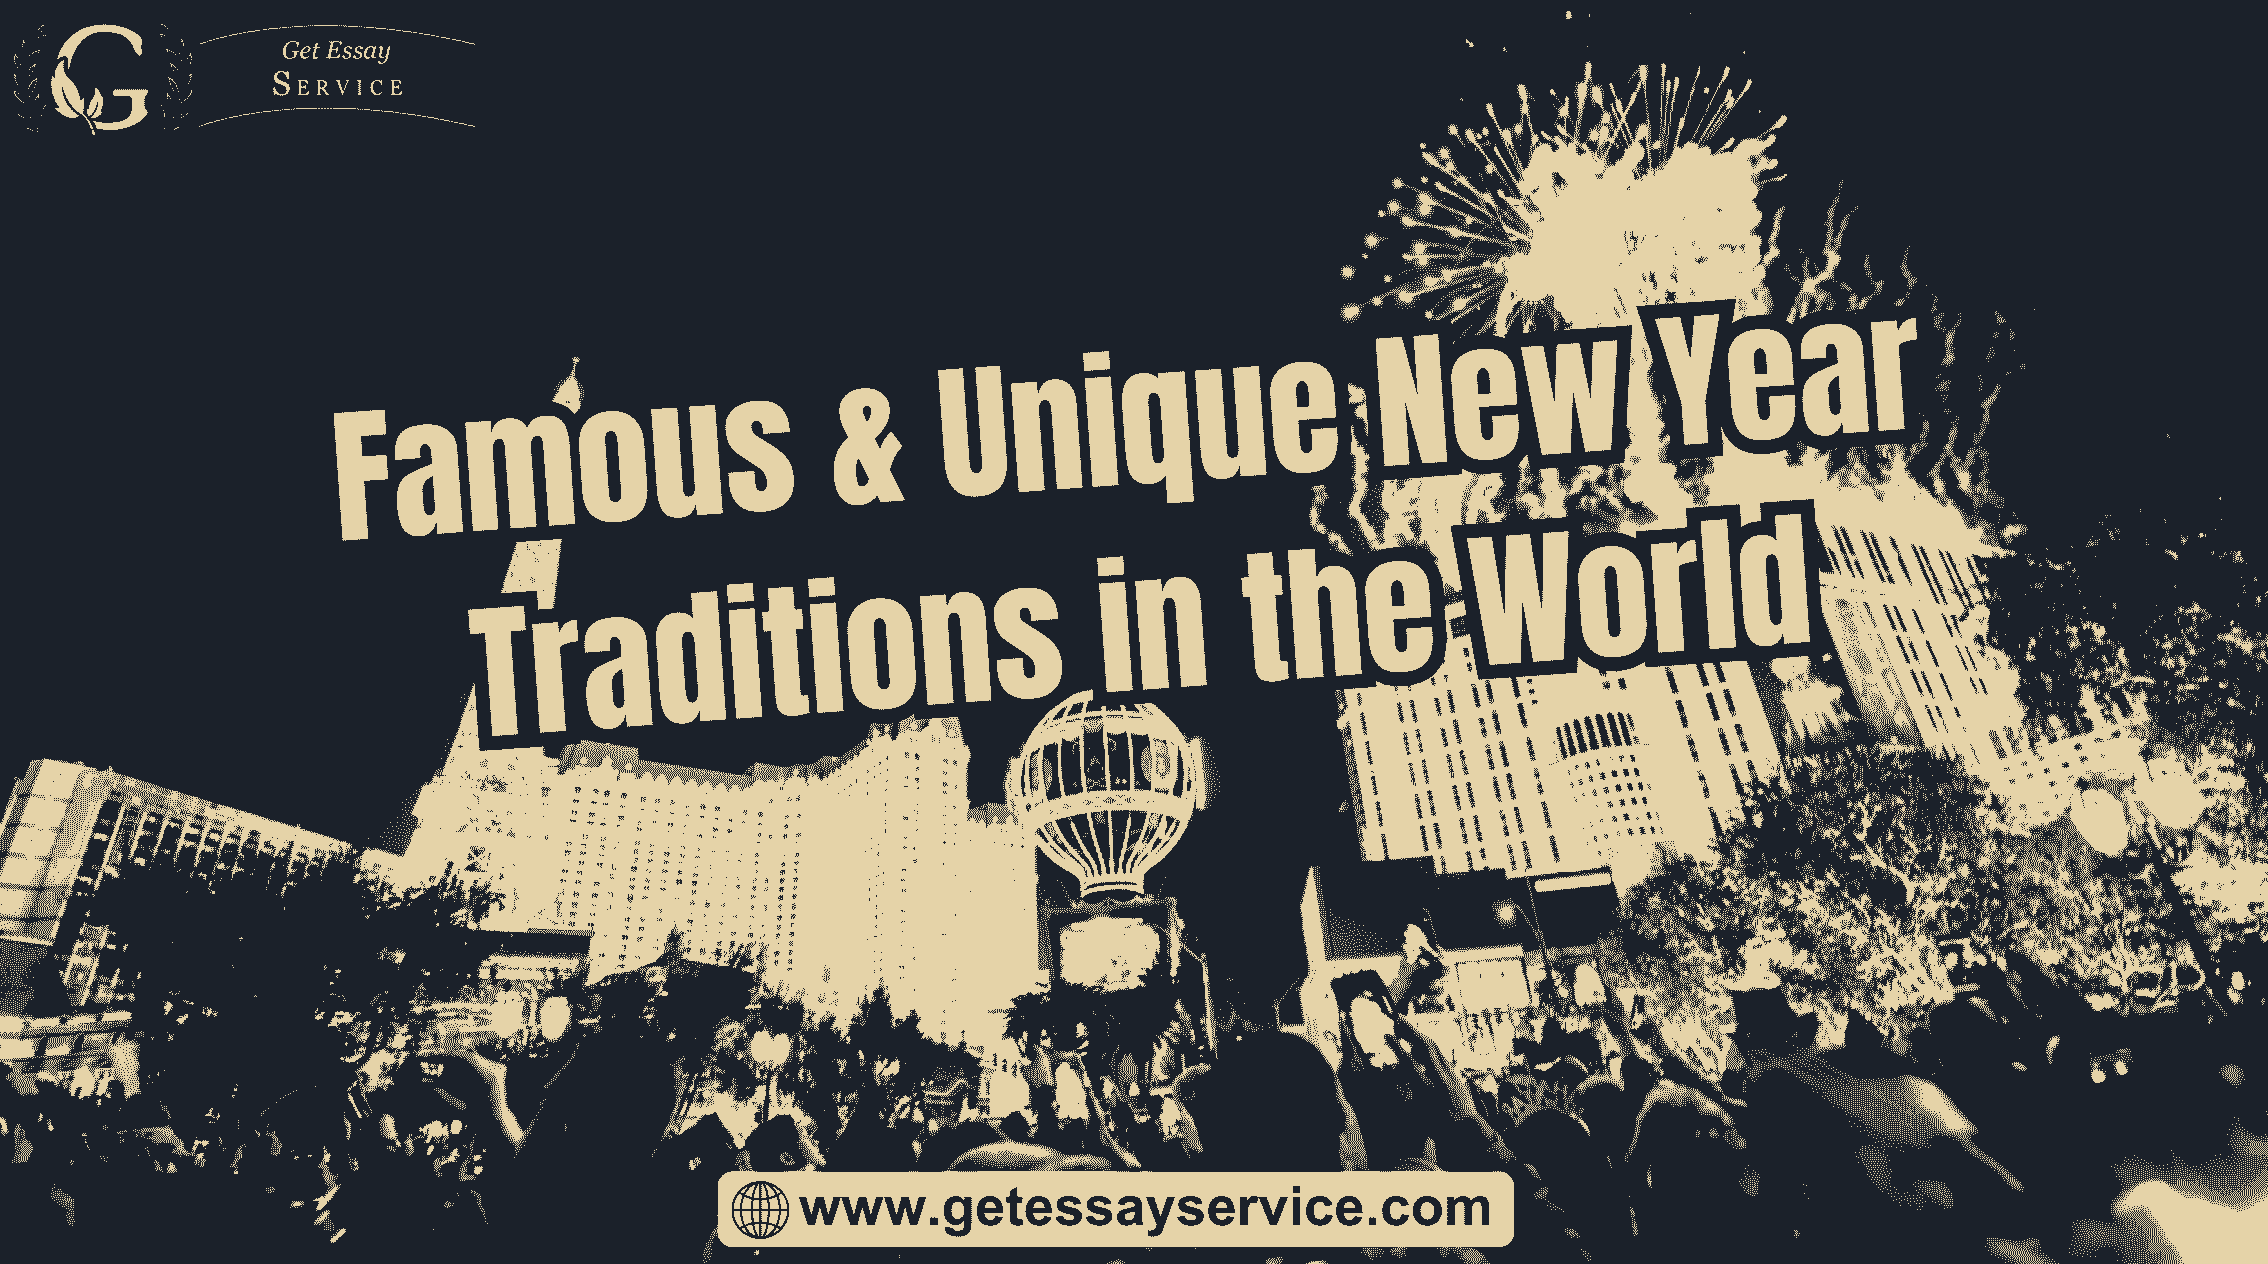 Famous & Unique New Year Traditions in the World